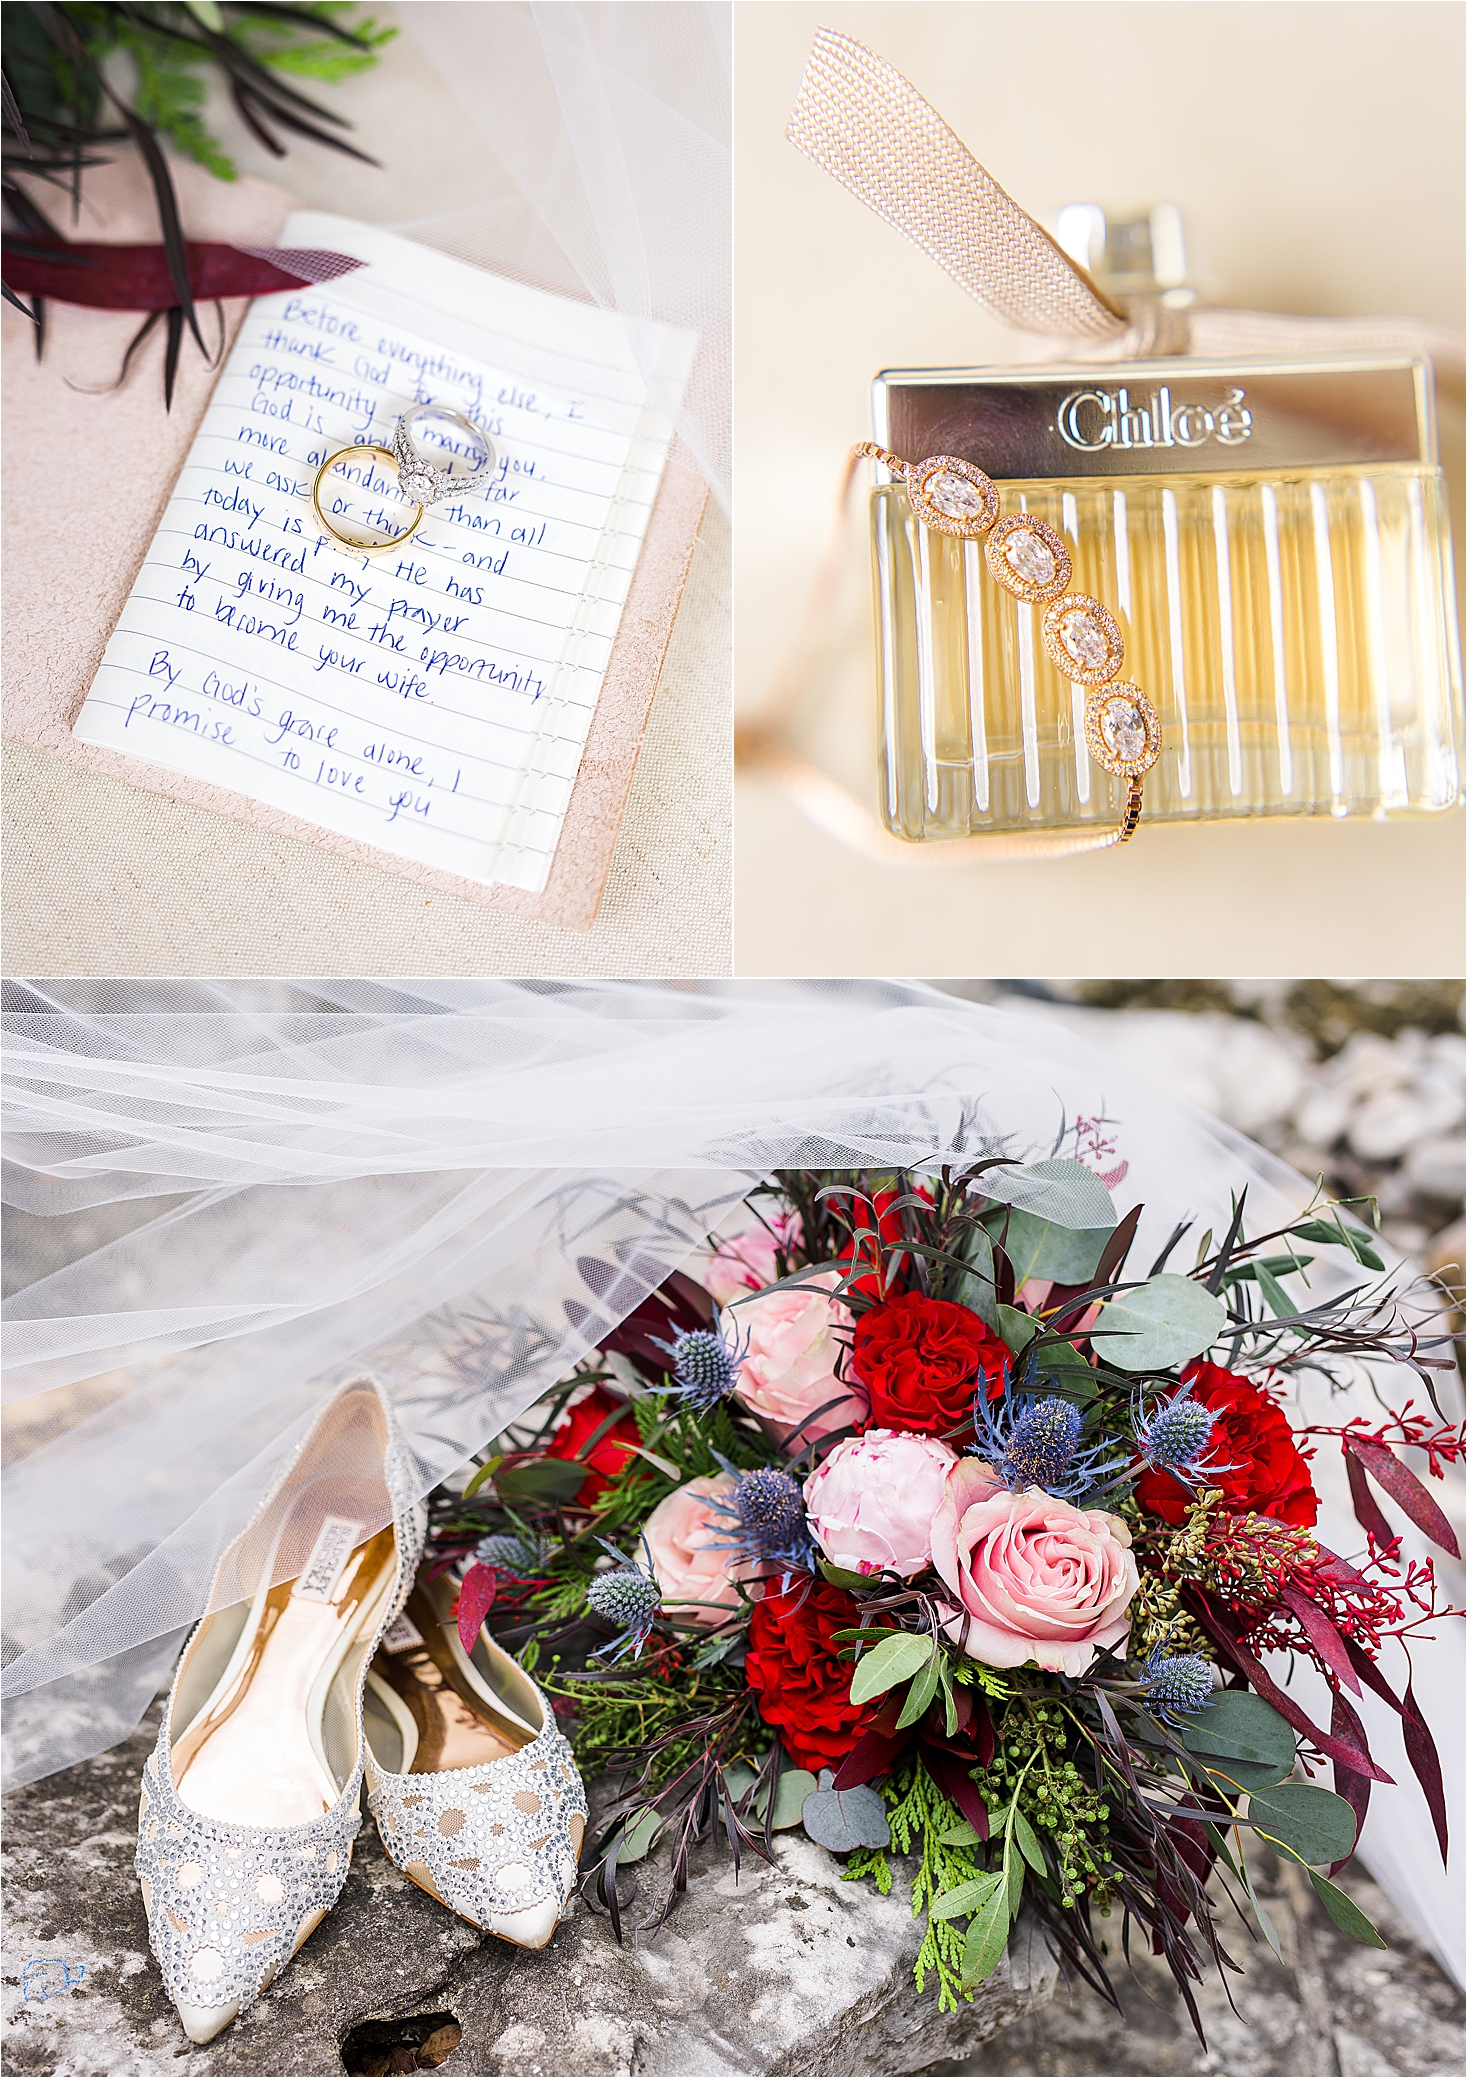 Some bridal details including rings on a vows written out, chloe perfume and shoes next to pink, red and blue winter bridal bouquet by San Antonio Wedding Photographer Jillian Hogan 